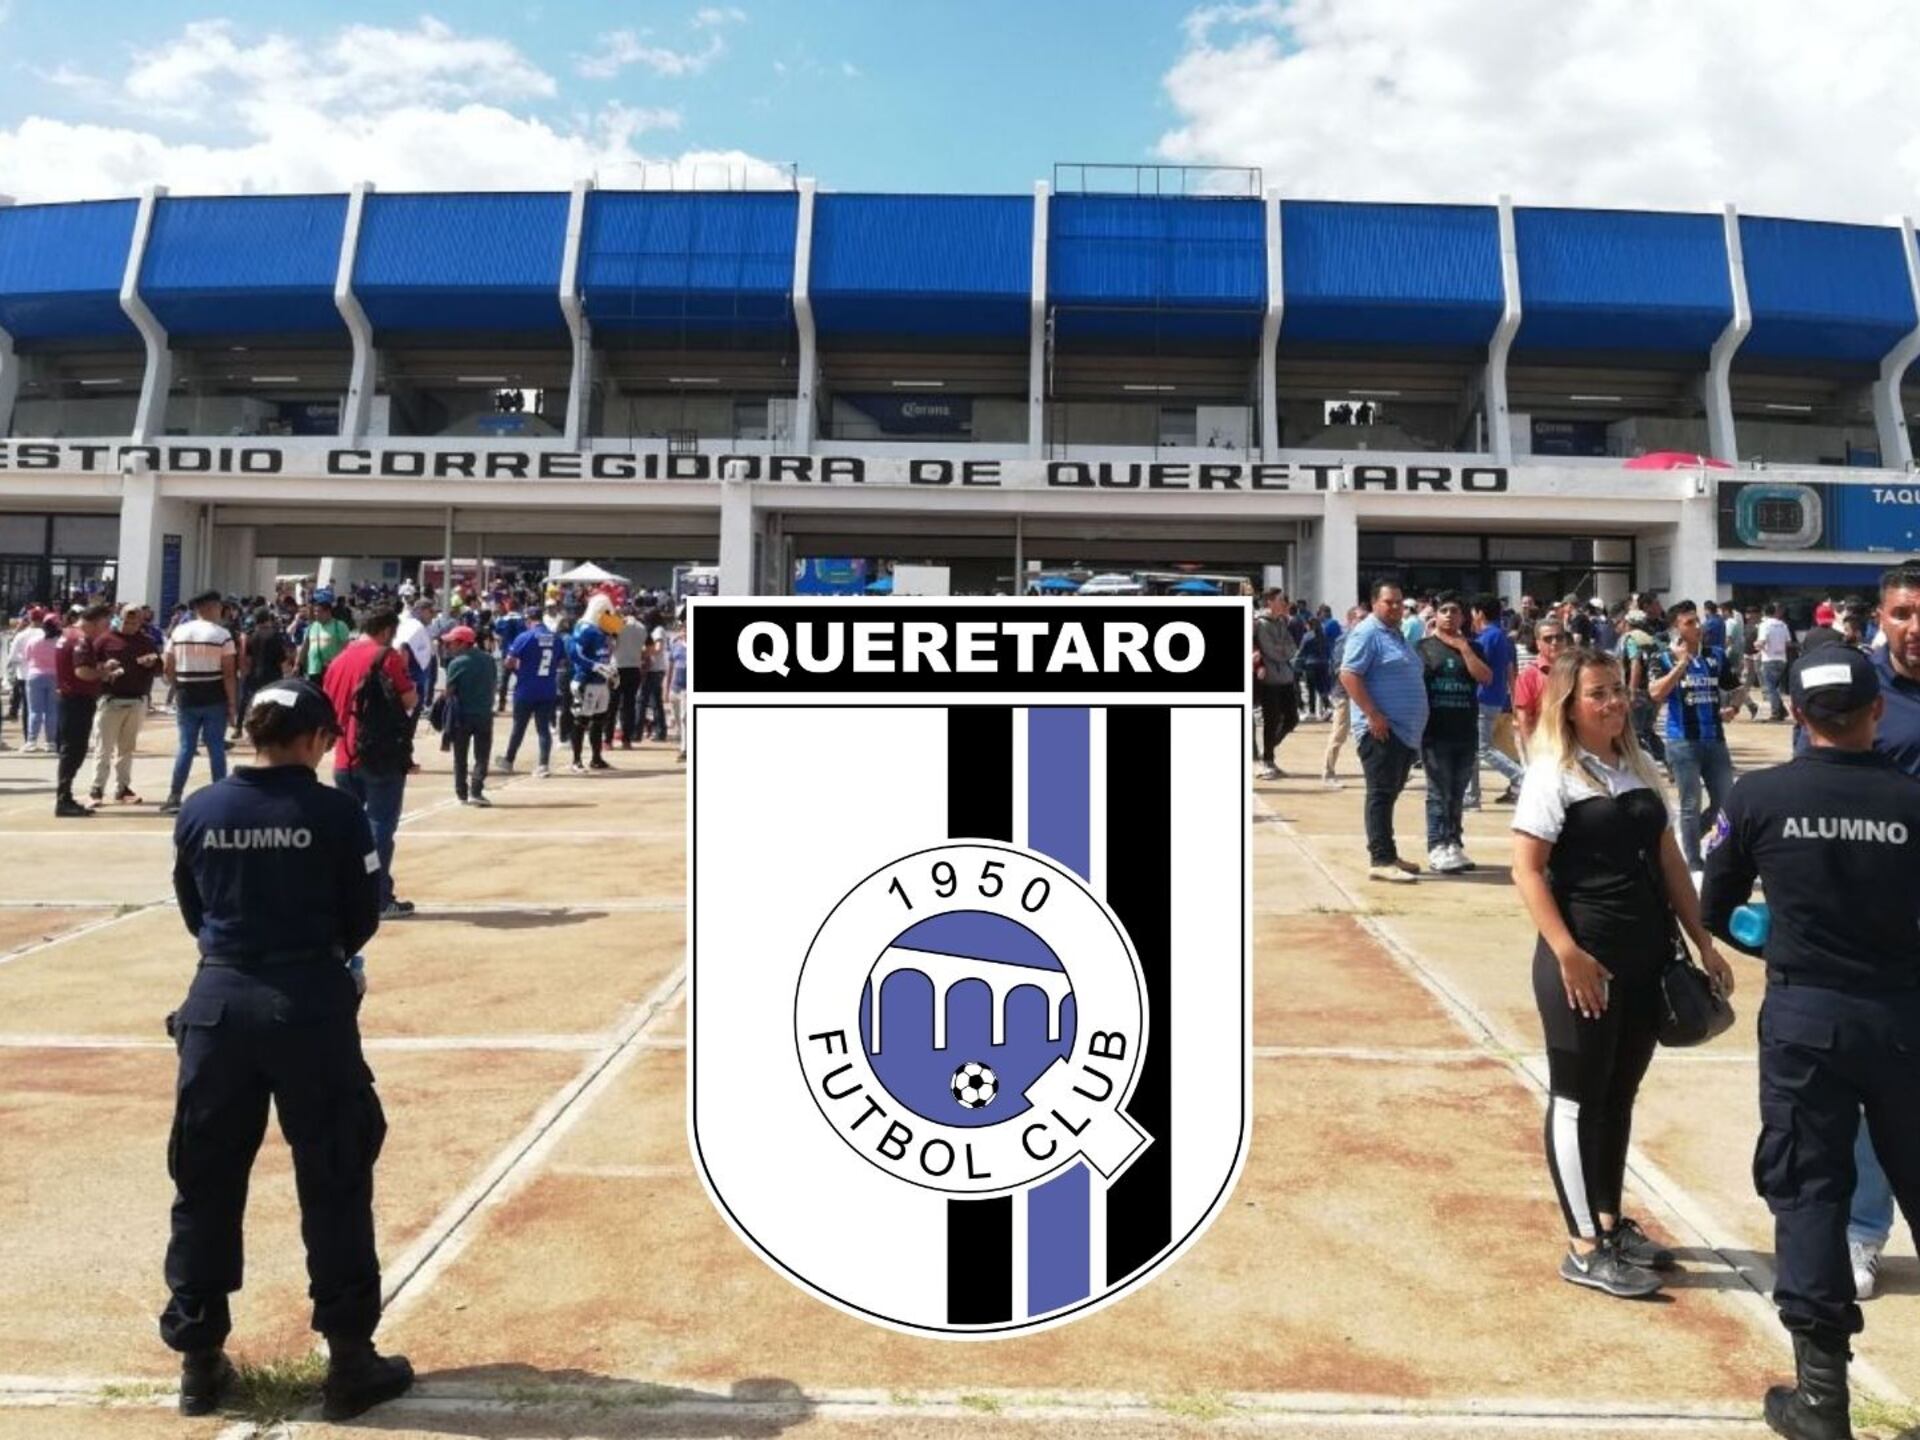 There won't be promotion for next season and this team will buy Club Querétaro to play in Liga MX